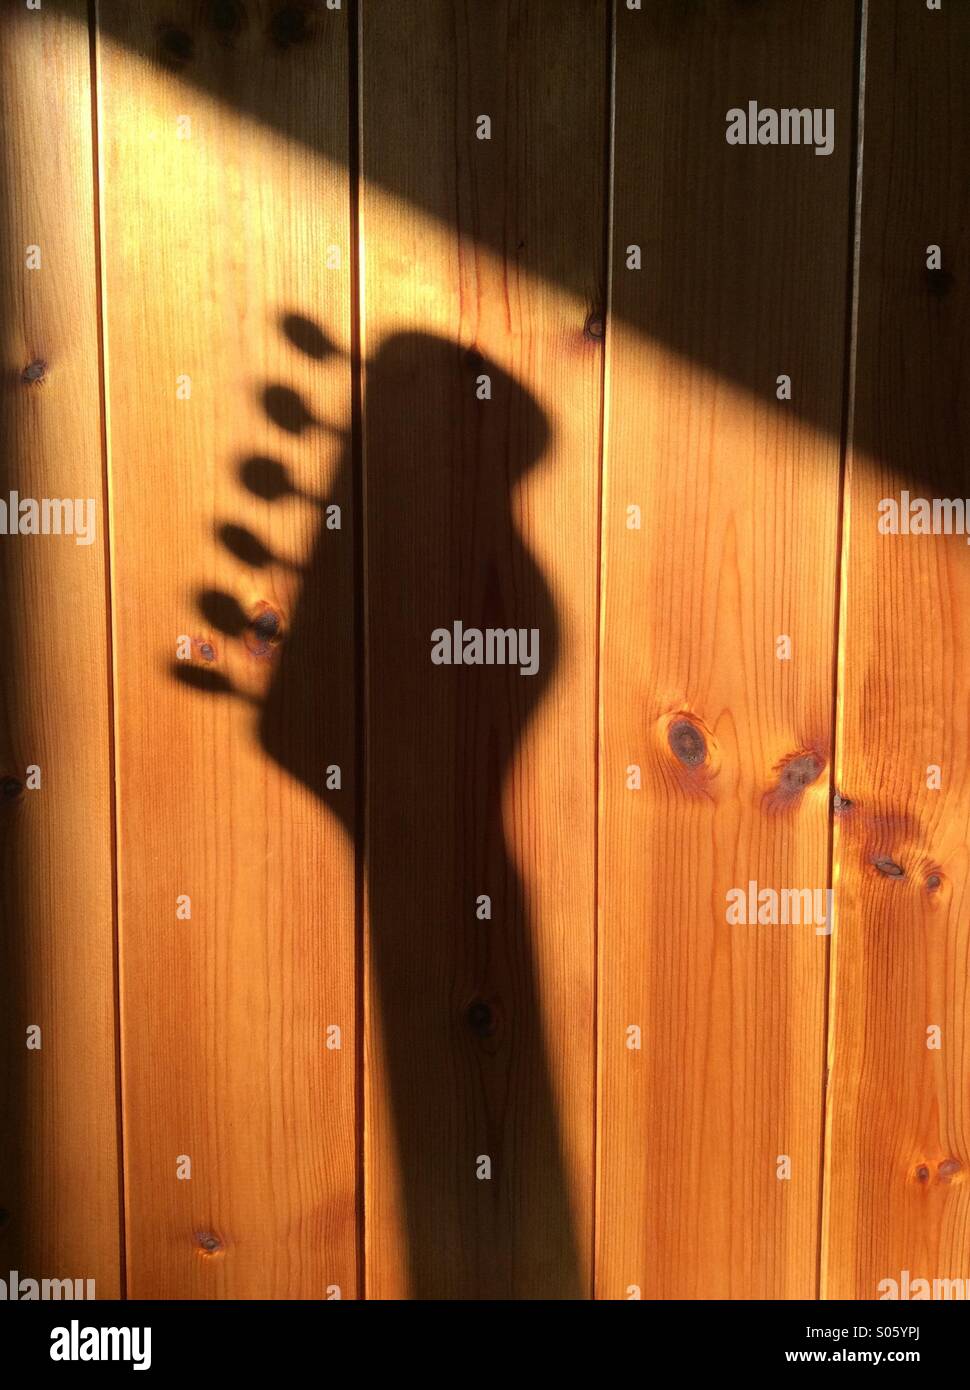 Shadow of electric guitar tuning head against wood panelling. Stock Photo